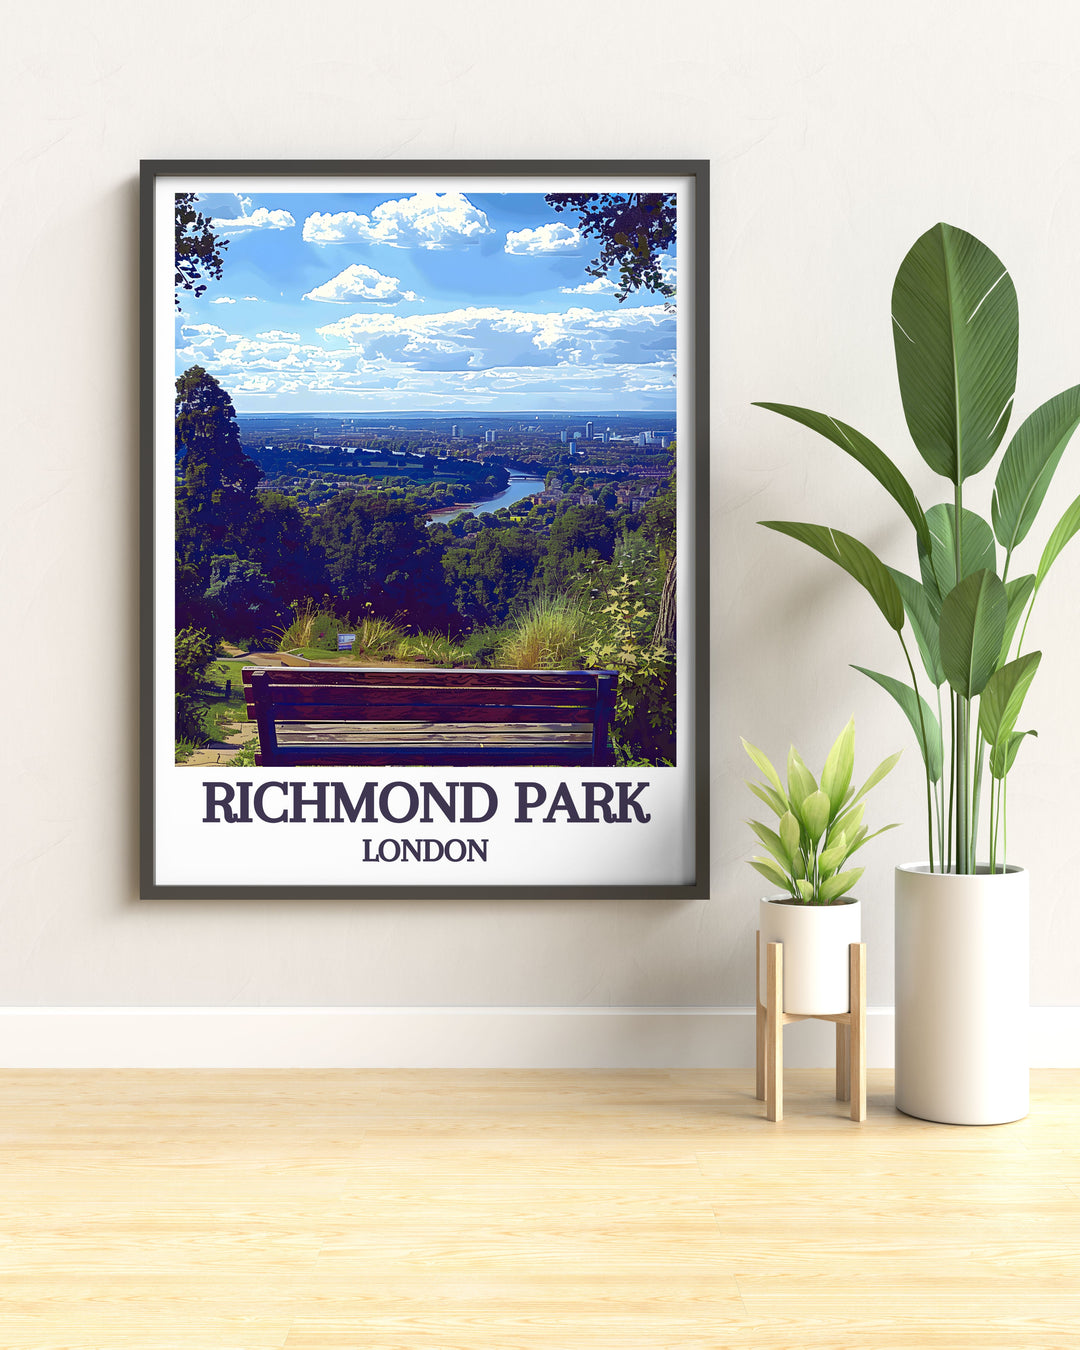 Celebrate Londons heritage with our Vintage Posters, highlighting iconic scenes like King Henrys Mound and Richmond Park.